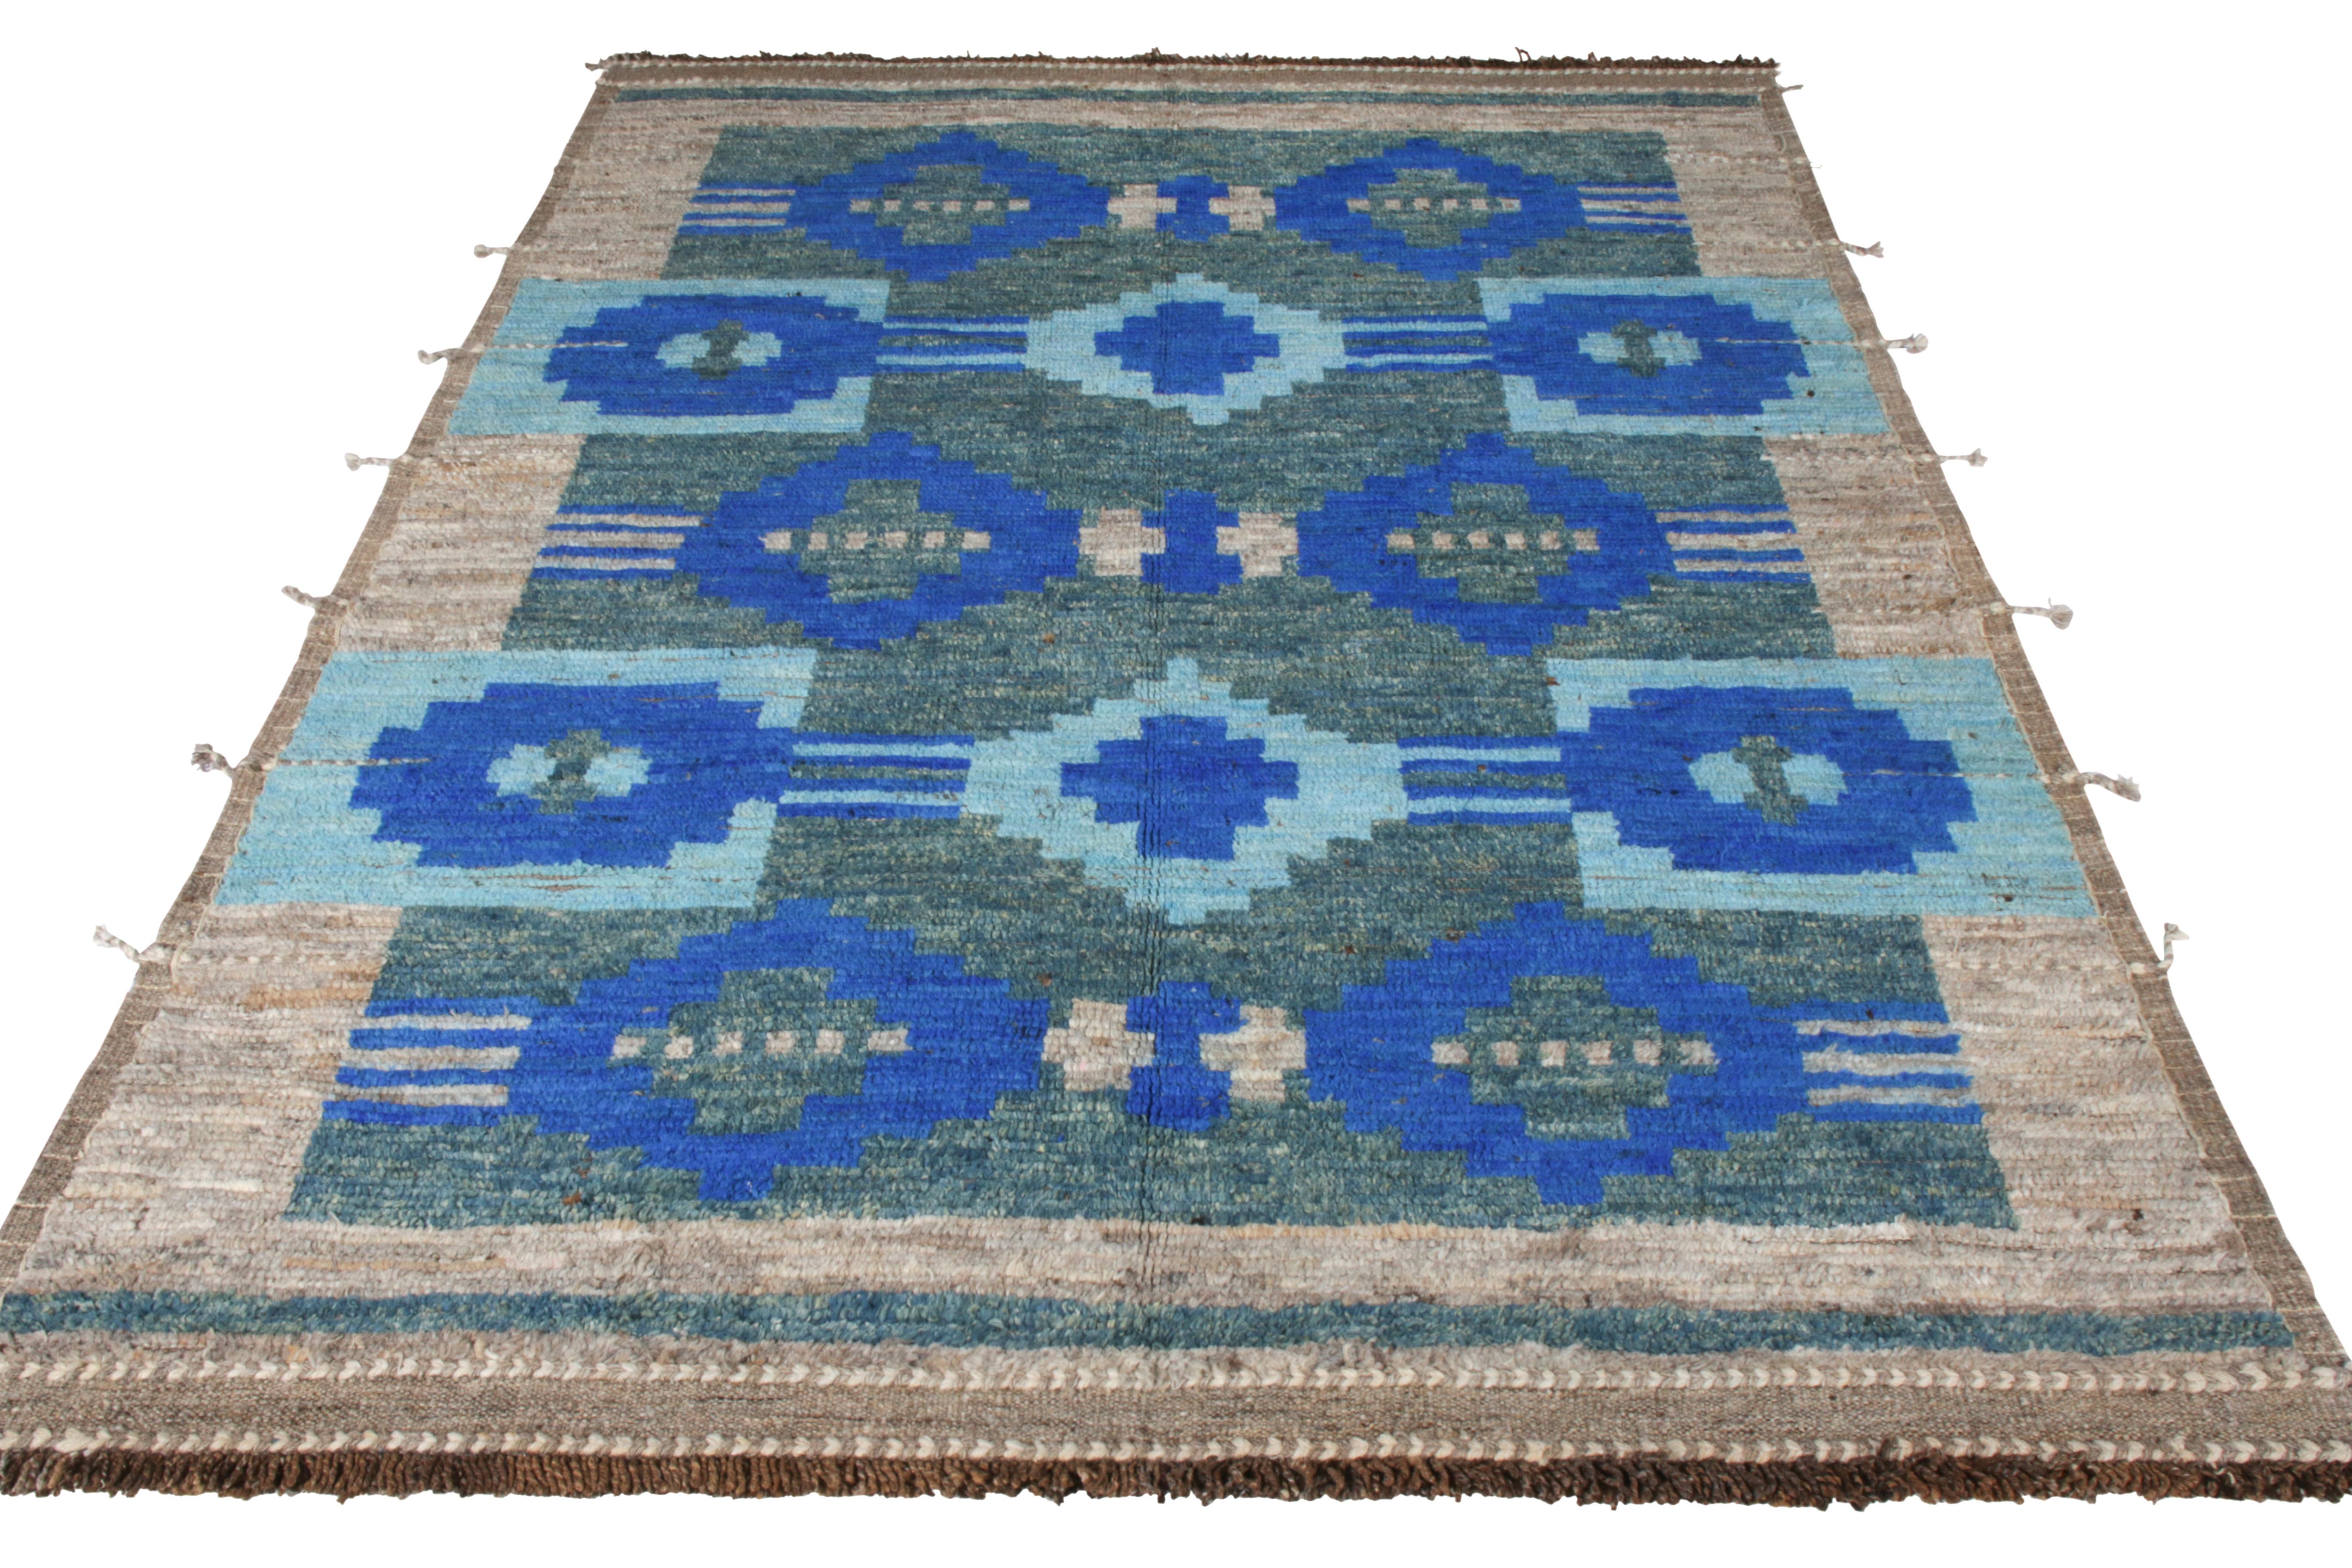 Hailing from Rug & Kilim’s New & Modern collection, a 6x9 piece displaying an interesting blend of texture and color in this size. Hand knotted in wool, the drawing features an all over geometric pattern in striking shades of blue playing joyfully